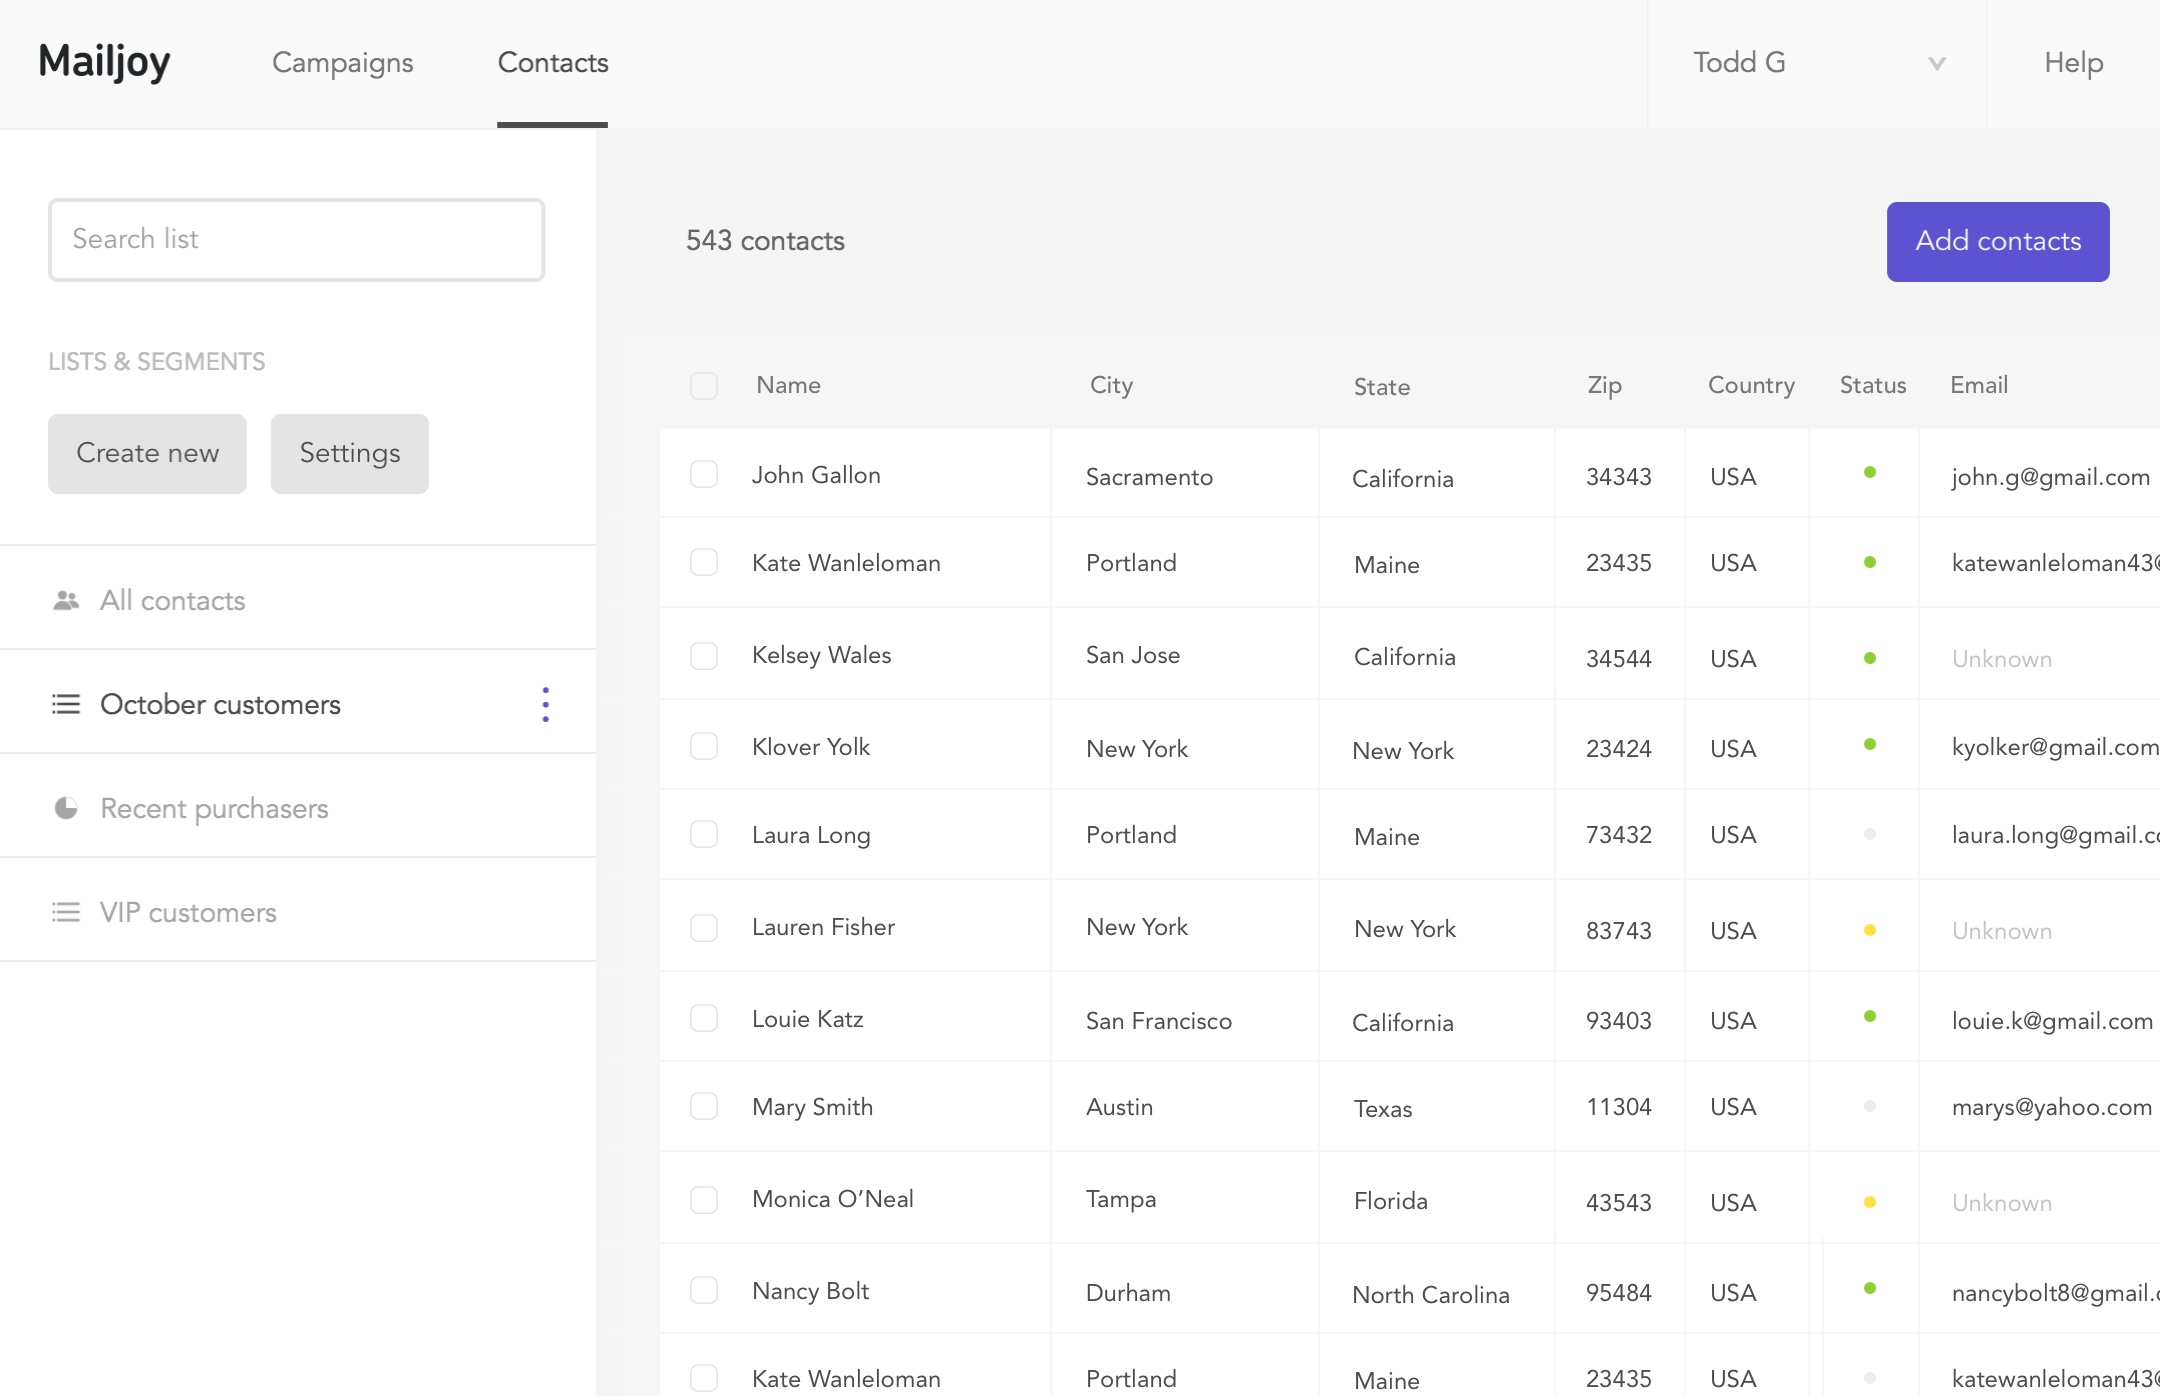 Manage your direct mail contacts and build lists